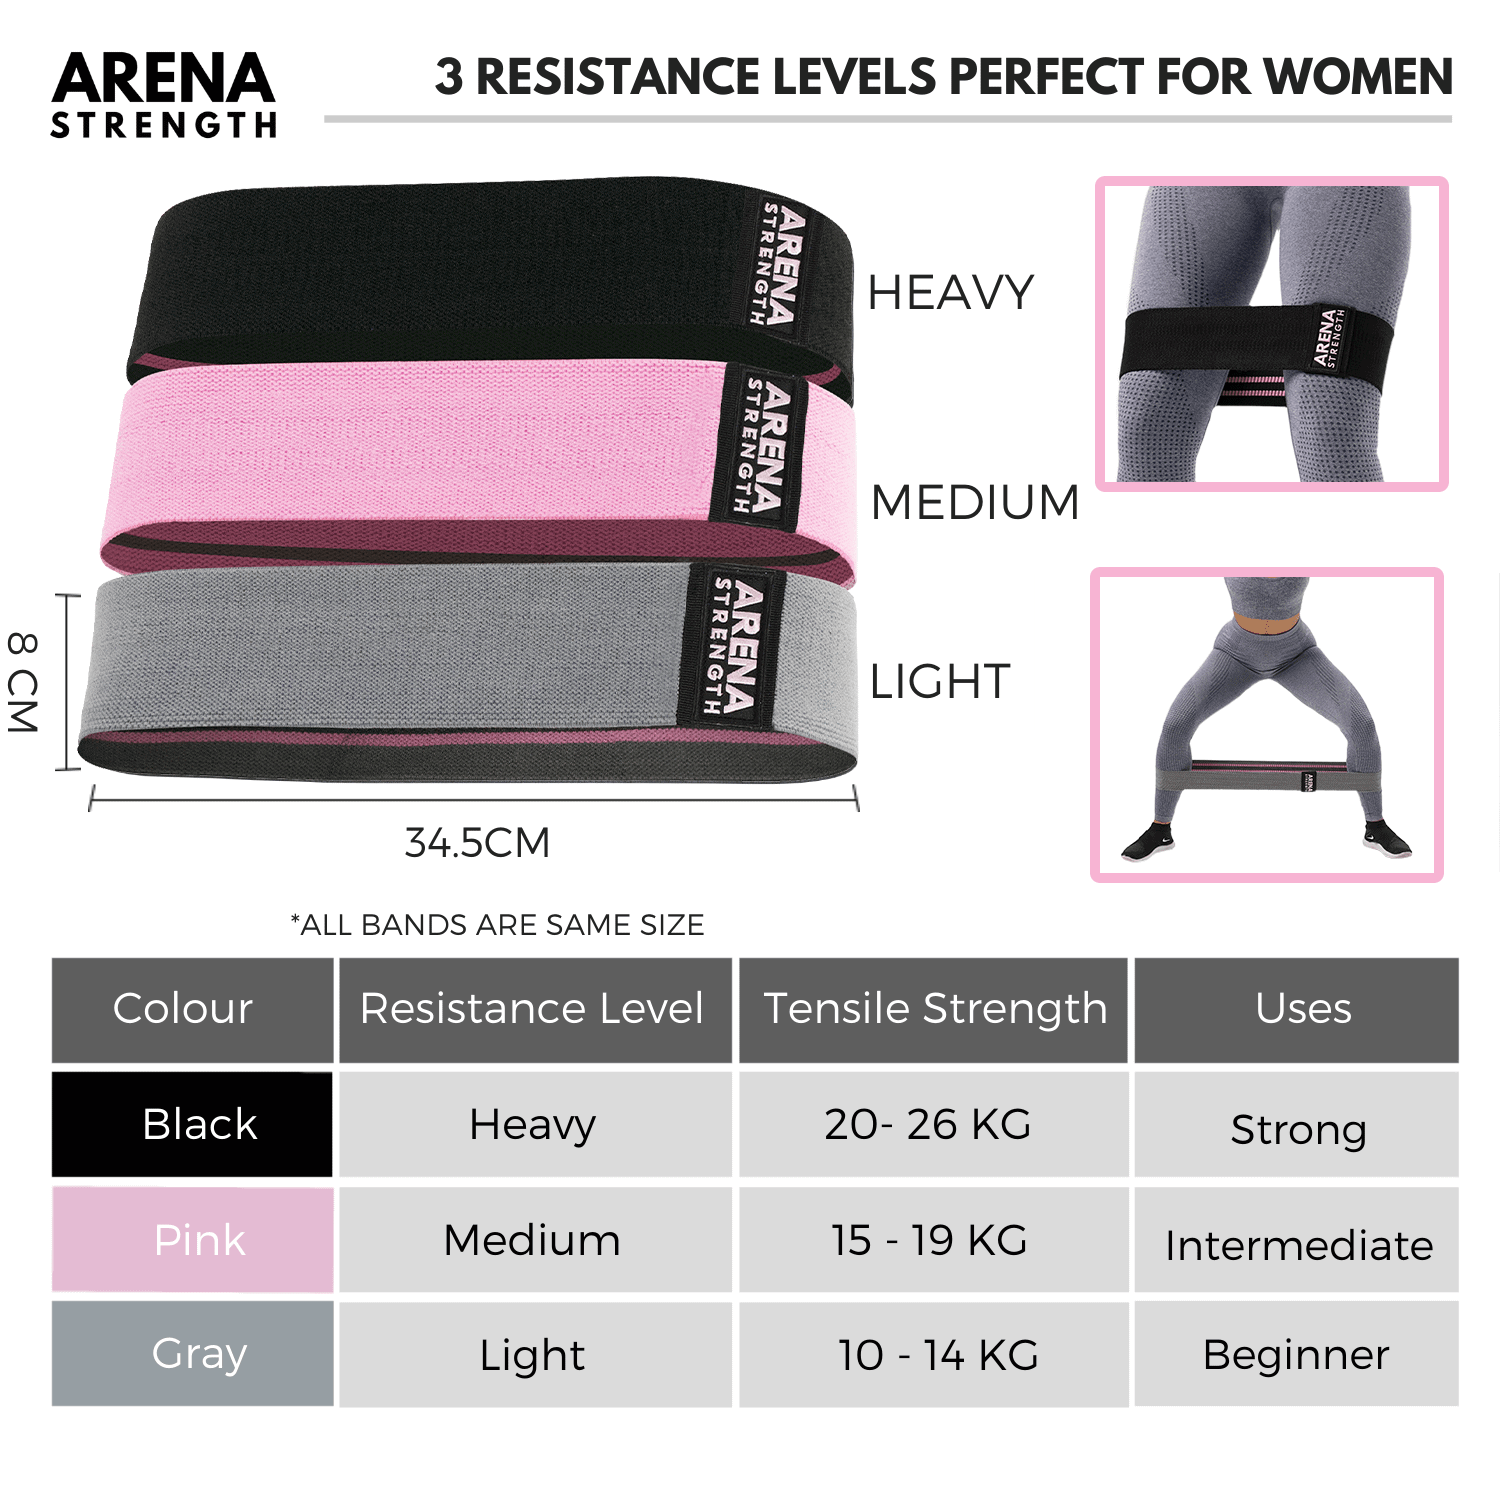 ELVIRE Fabric Resistance Bands for Working Out Set of 3 Booty Bands for Glutes OR Set of 3 Long Resistance Bands for Full Body Workout 3 Fitness Loop Bands Levels for Women & Men 2 Styles 